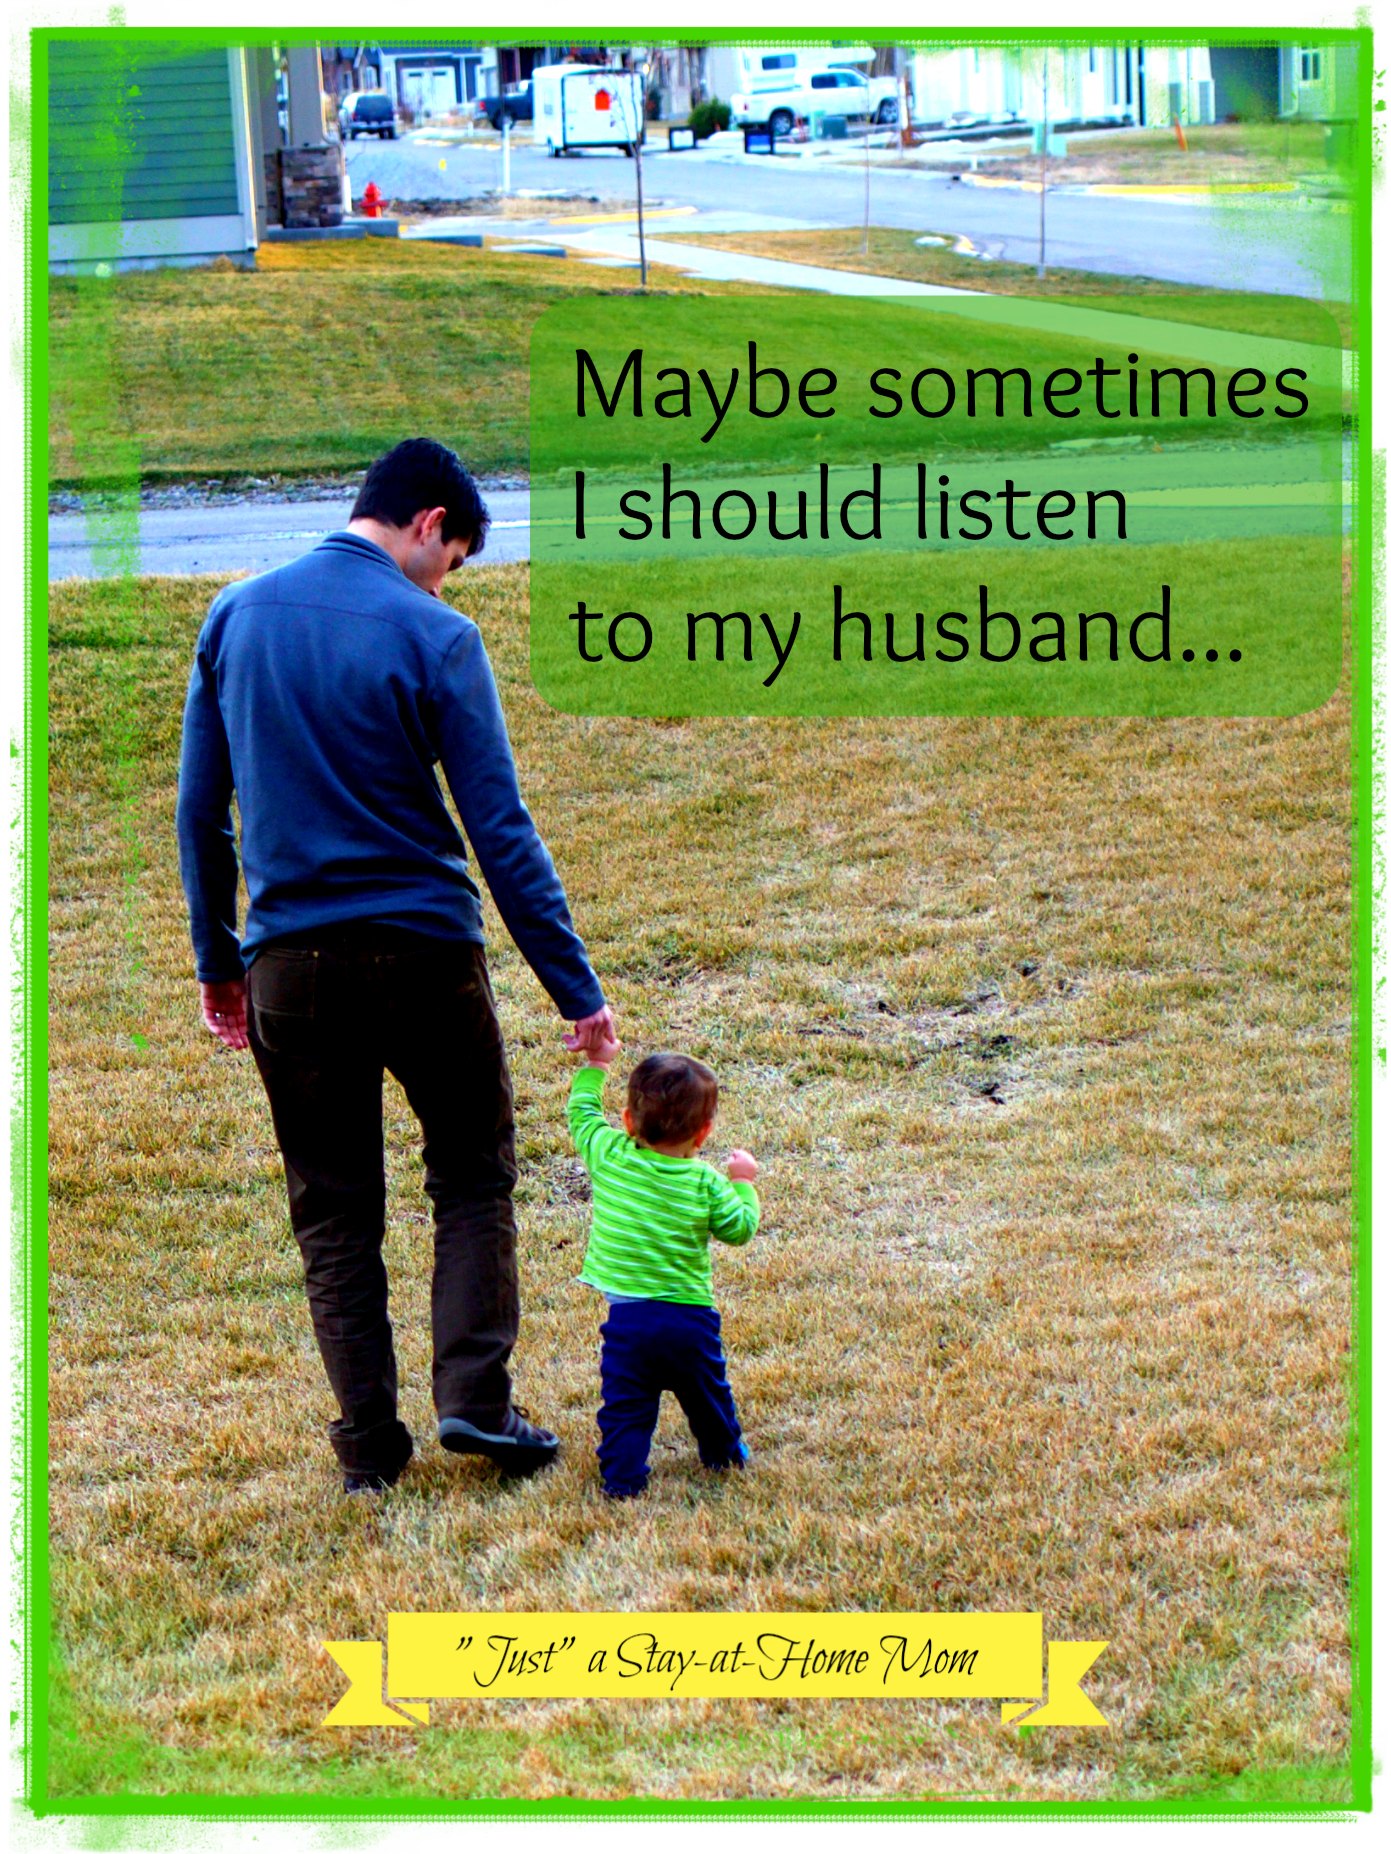 Maybe I should listen to my husband….